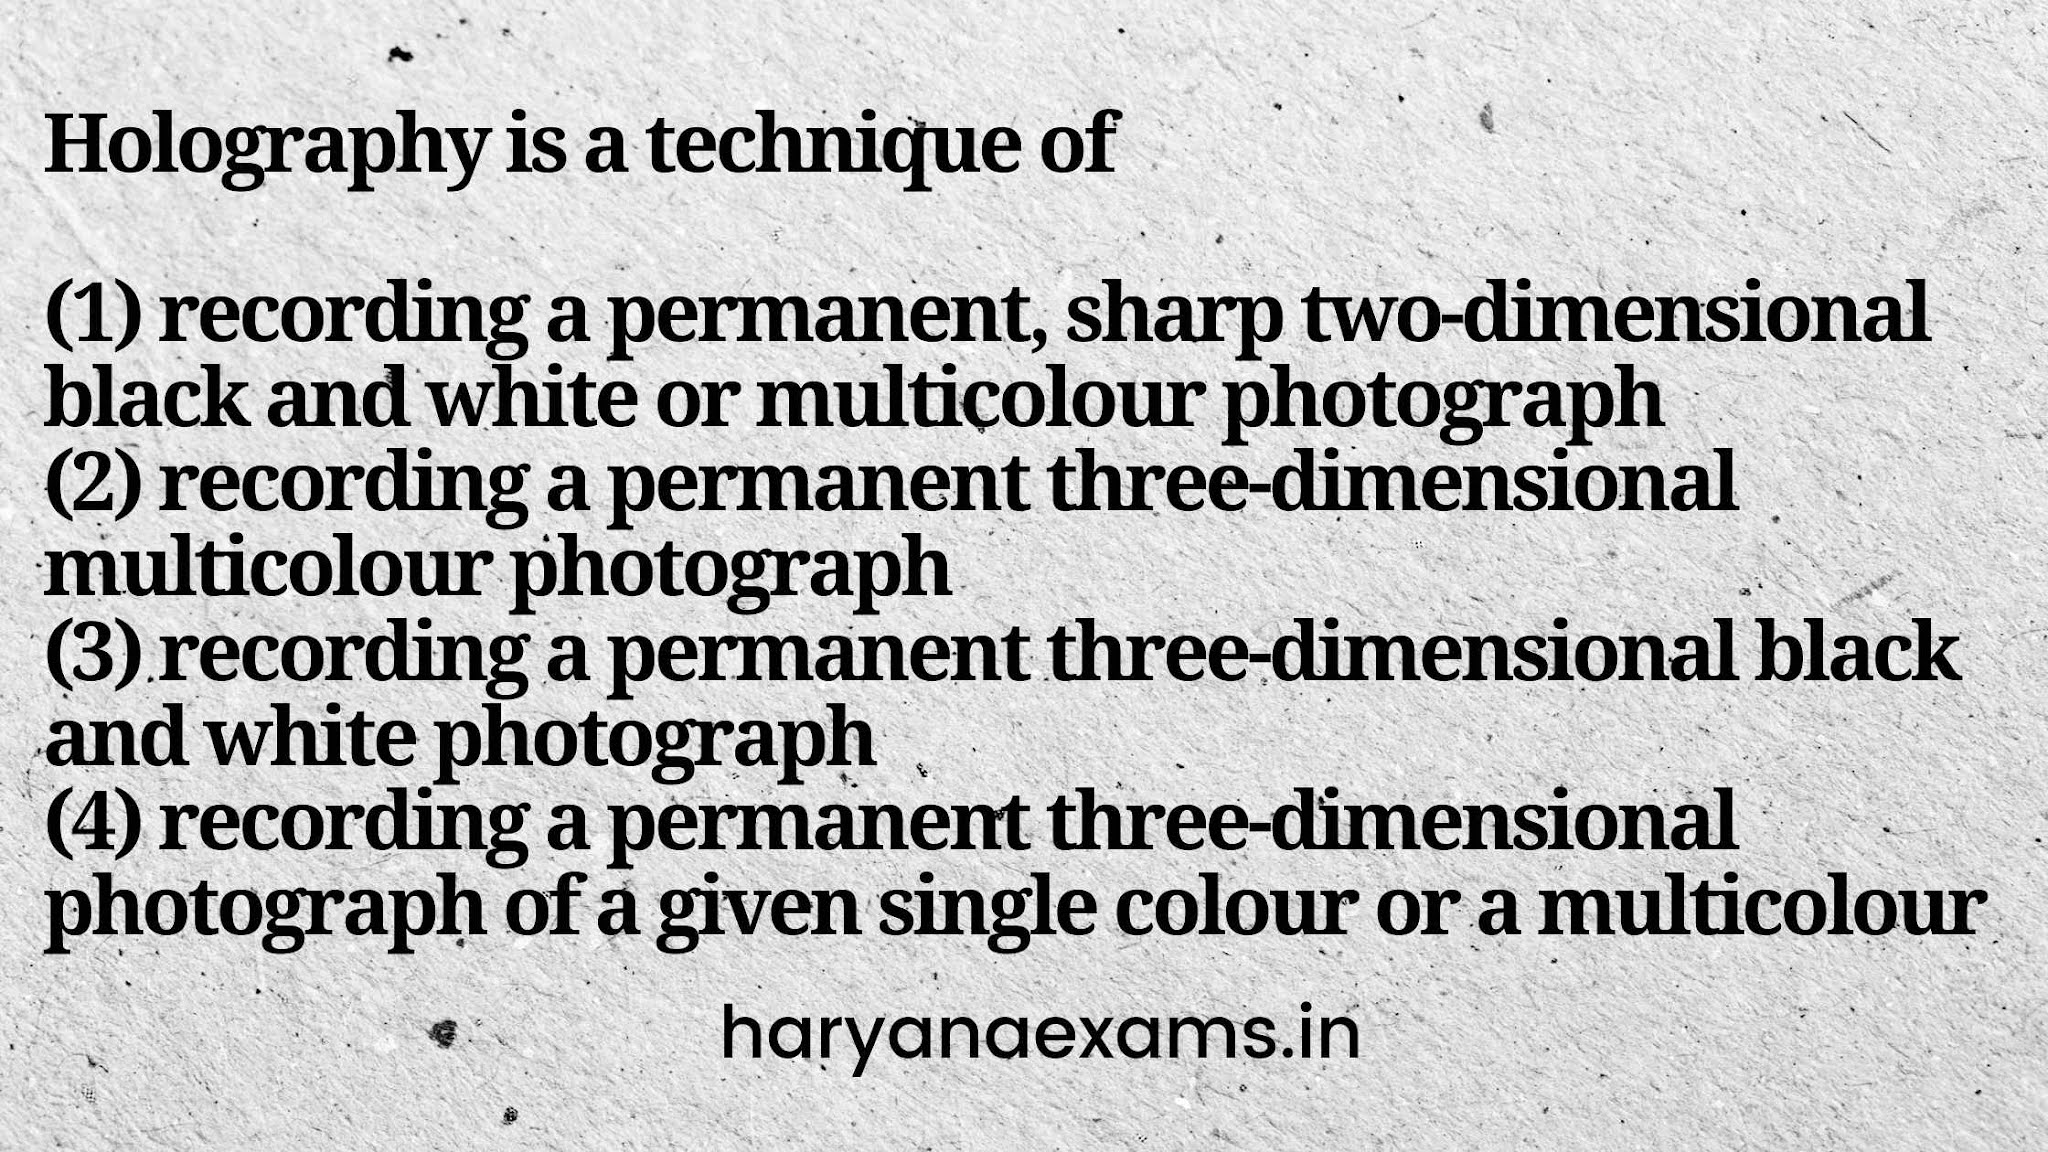 Holography is a technique of   (1) recording a permanent, sharp two-dimensional black and white or multicolour photograph   (2) recording a permanent three-dimensional multicolour photograph   (3) recording a permanent three-dimensional black and white photograph   (4) recording a permanent three-dimensional photograph of a given single colour or a multicolour